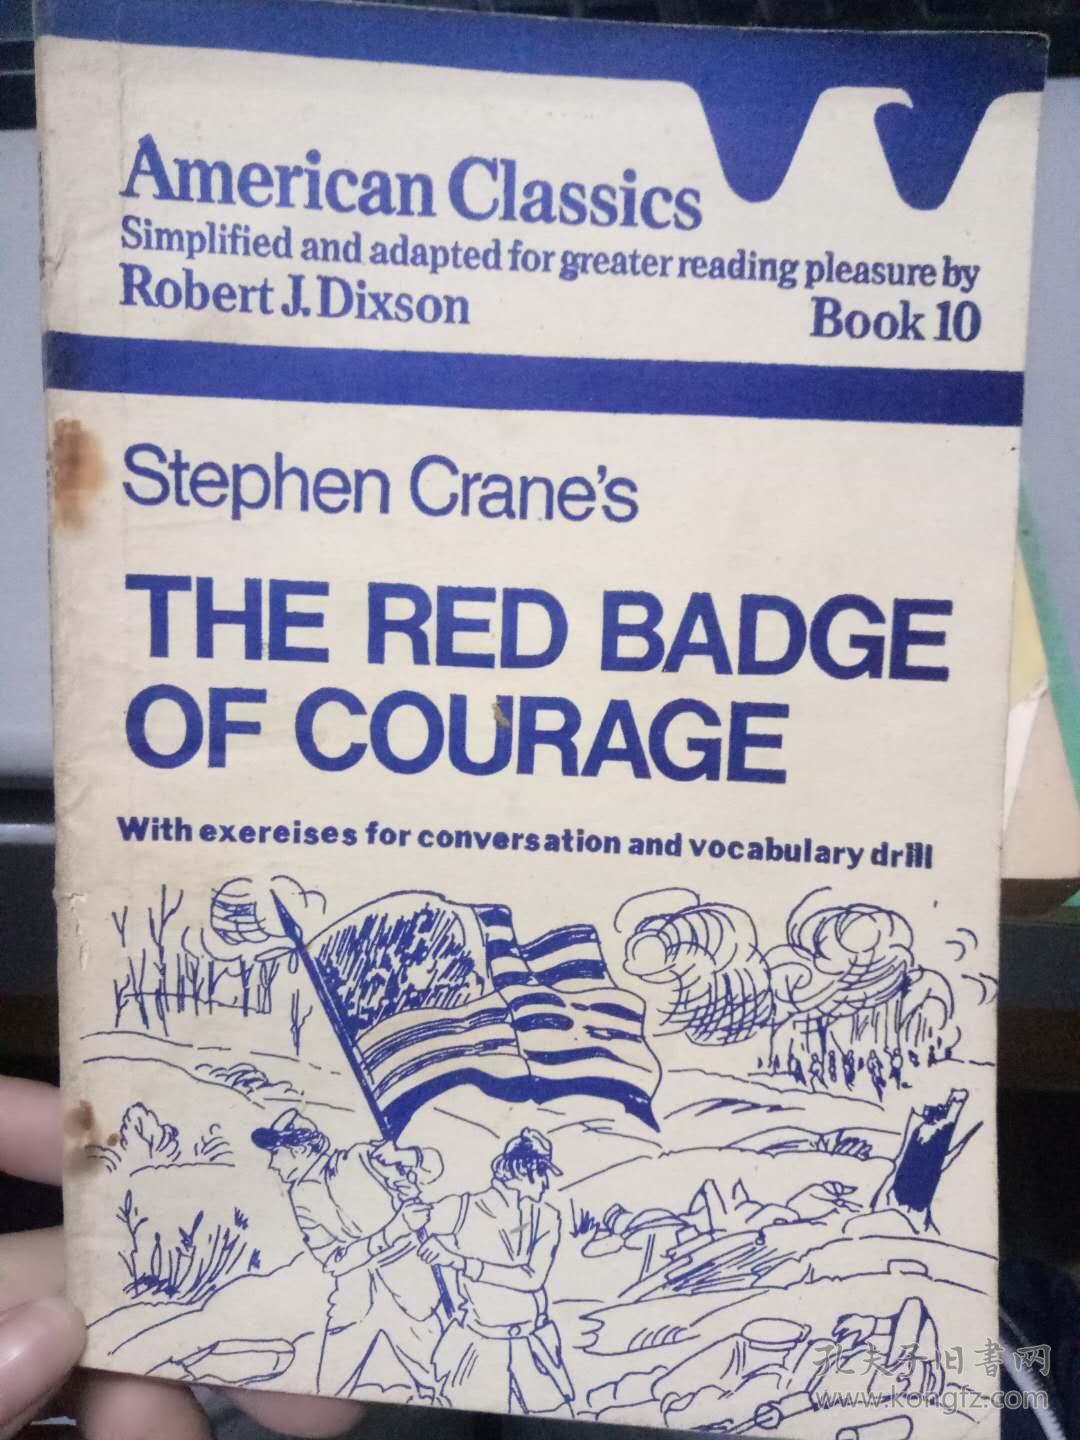 《Stephen Crane's THE RED BADGE OF COURAGE Book10》